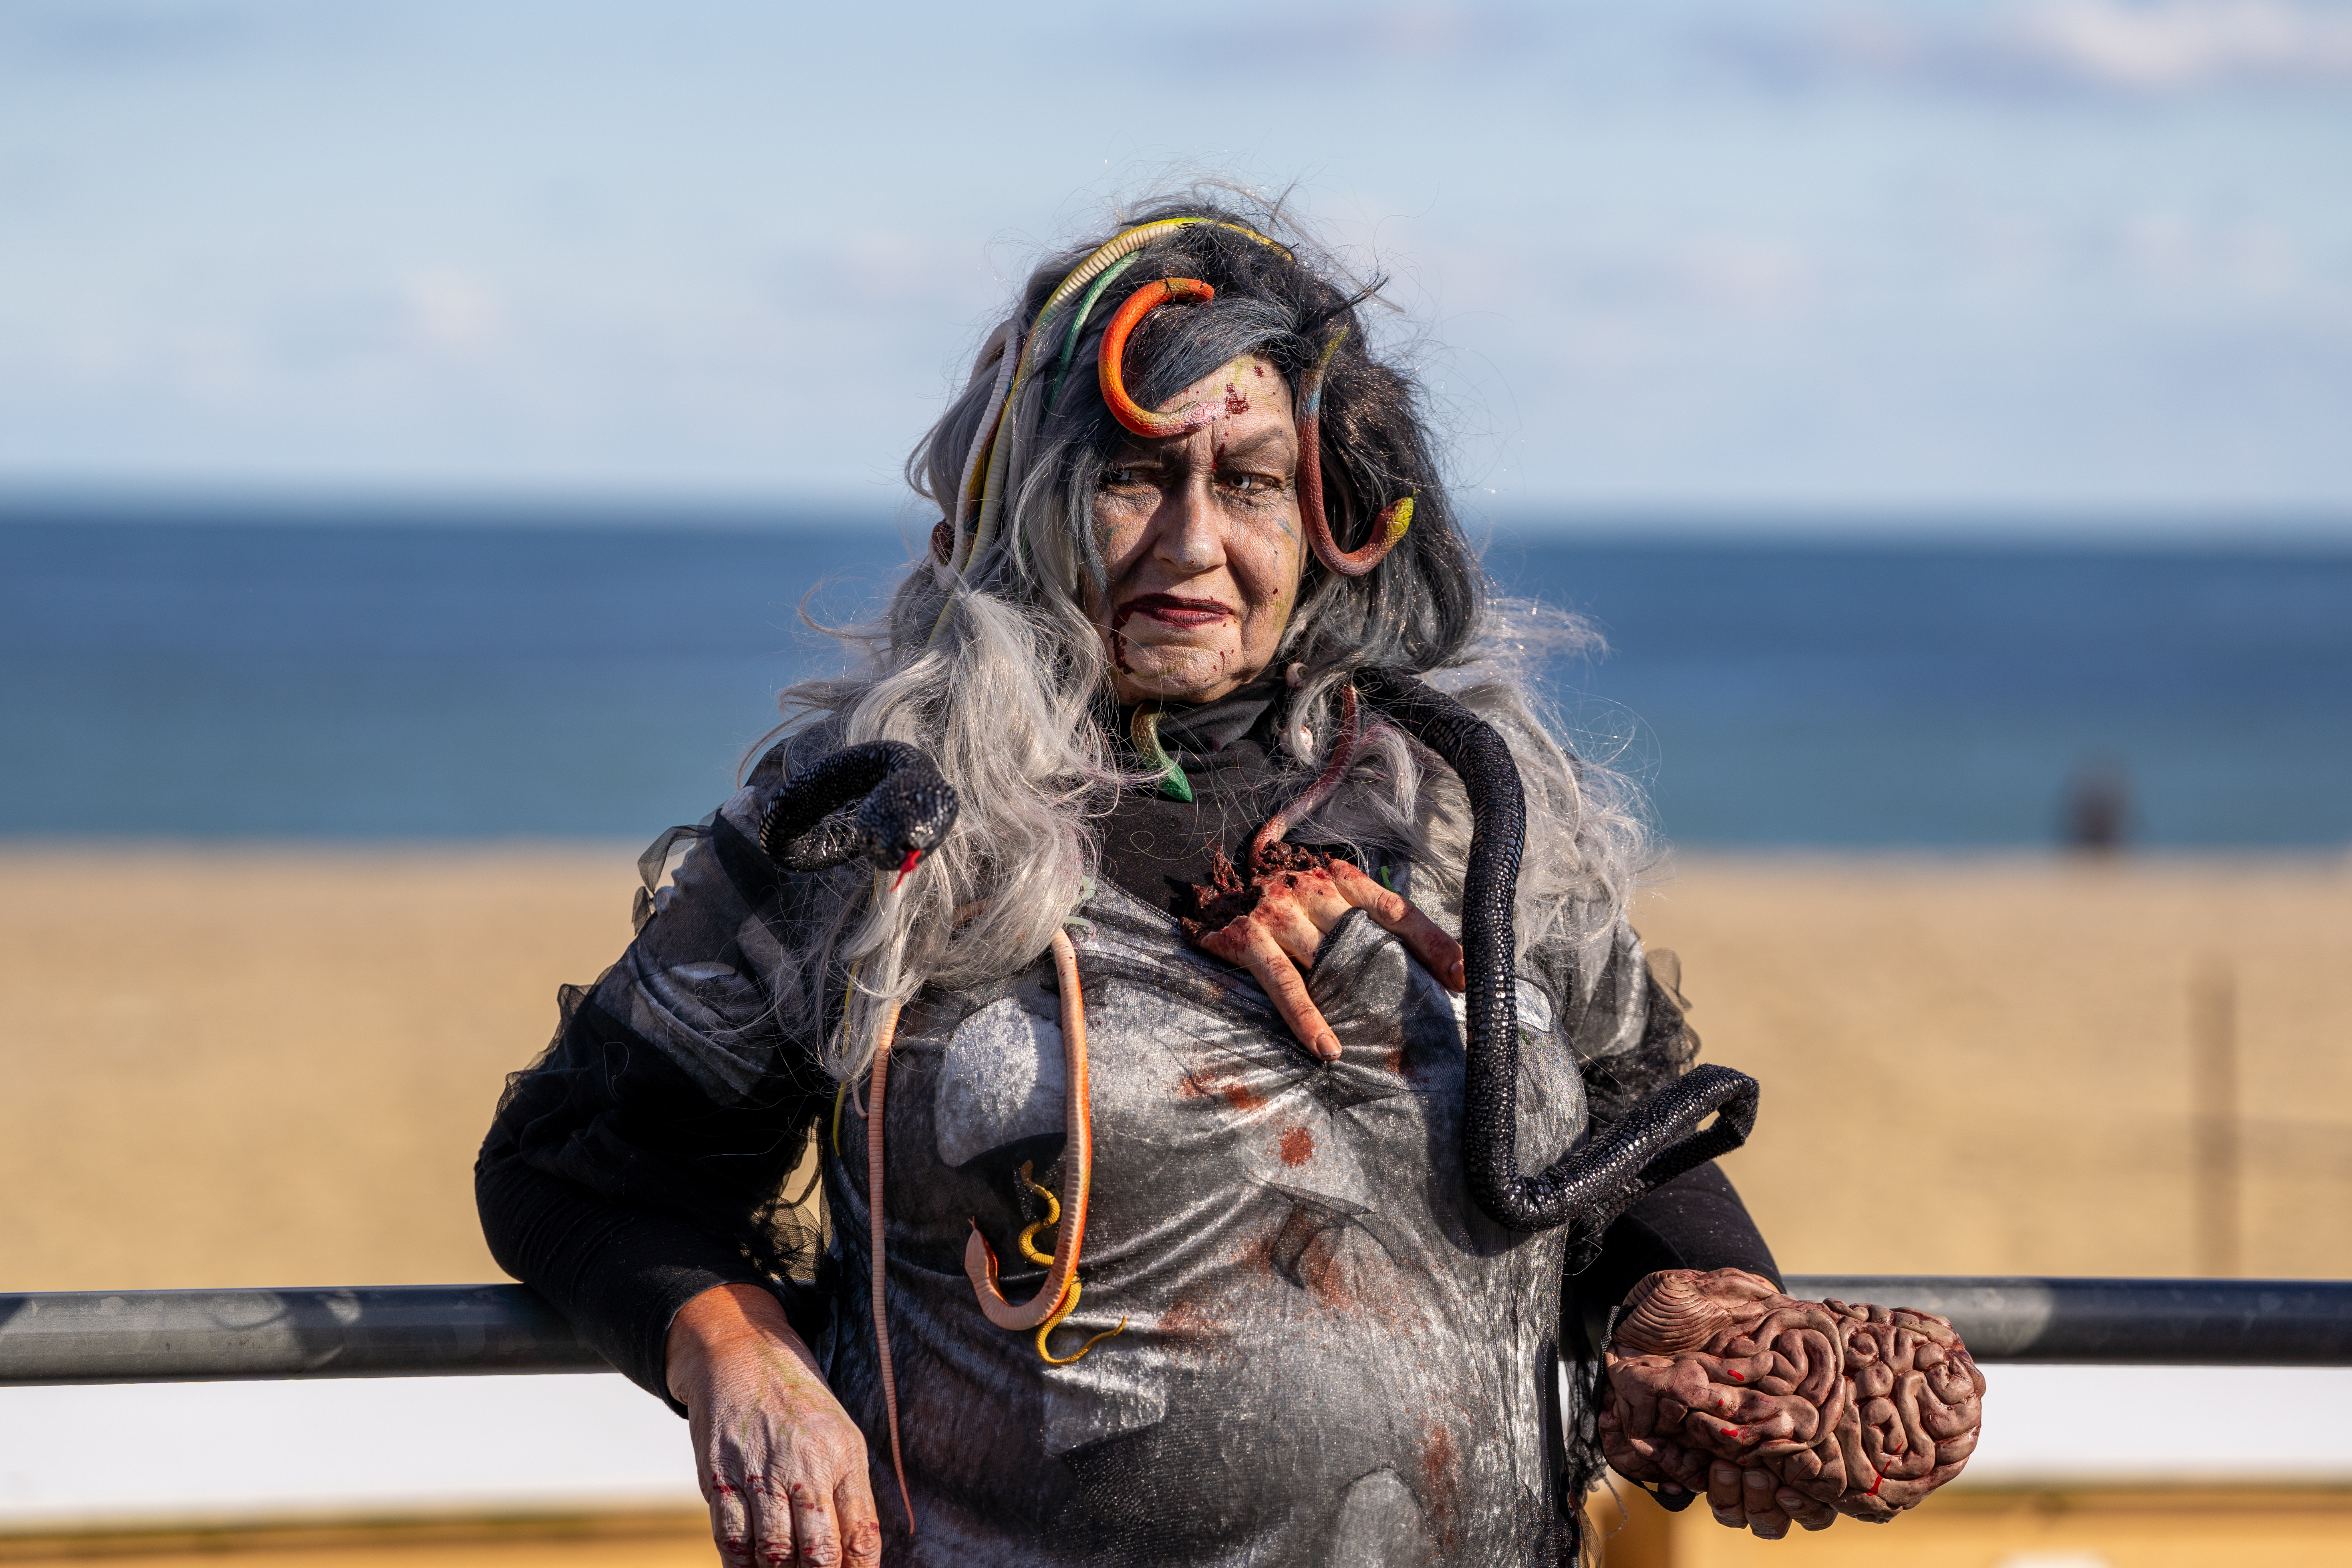 Cindy Gisinger, dressed as zombie Medusa, waits on the boardwalk for the zombie walk to begin during the 14th Asbury Park Zombie Walk in Asbury Park on Saturday, October 8, 2022. The zombie walk held its first themed year with the theme being 80's and 90's punk and metal.